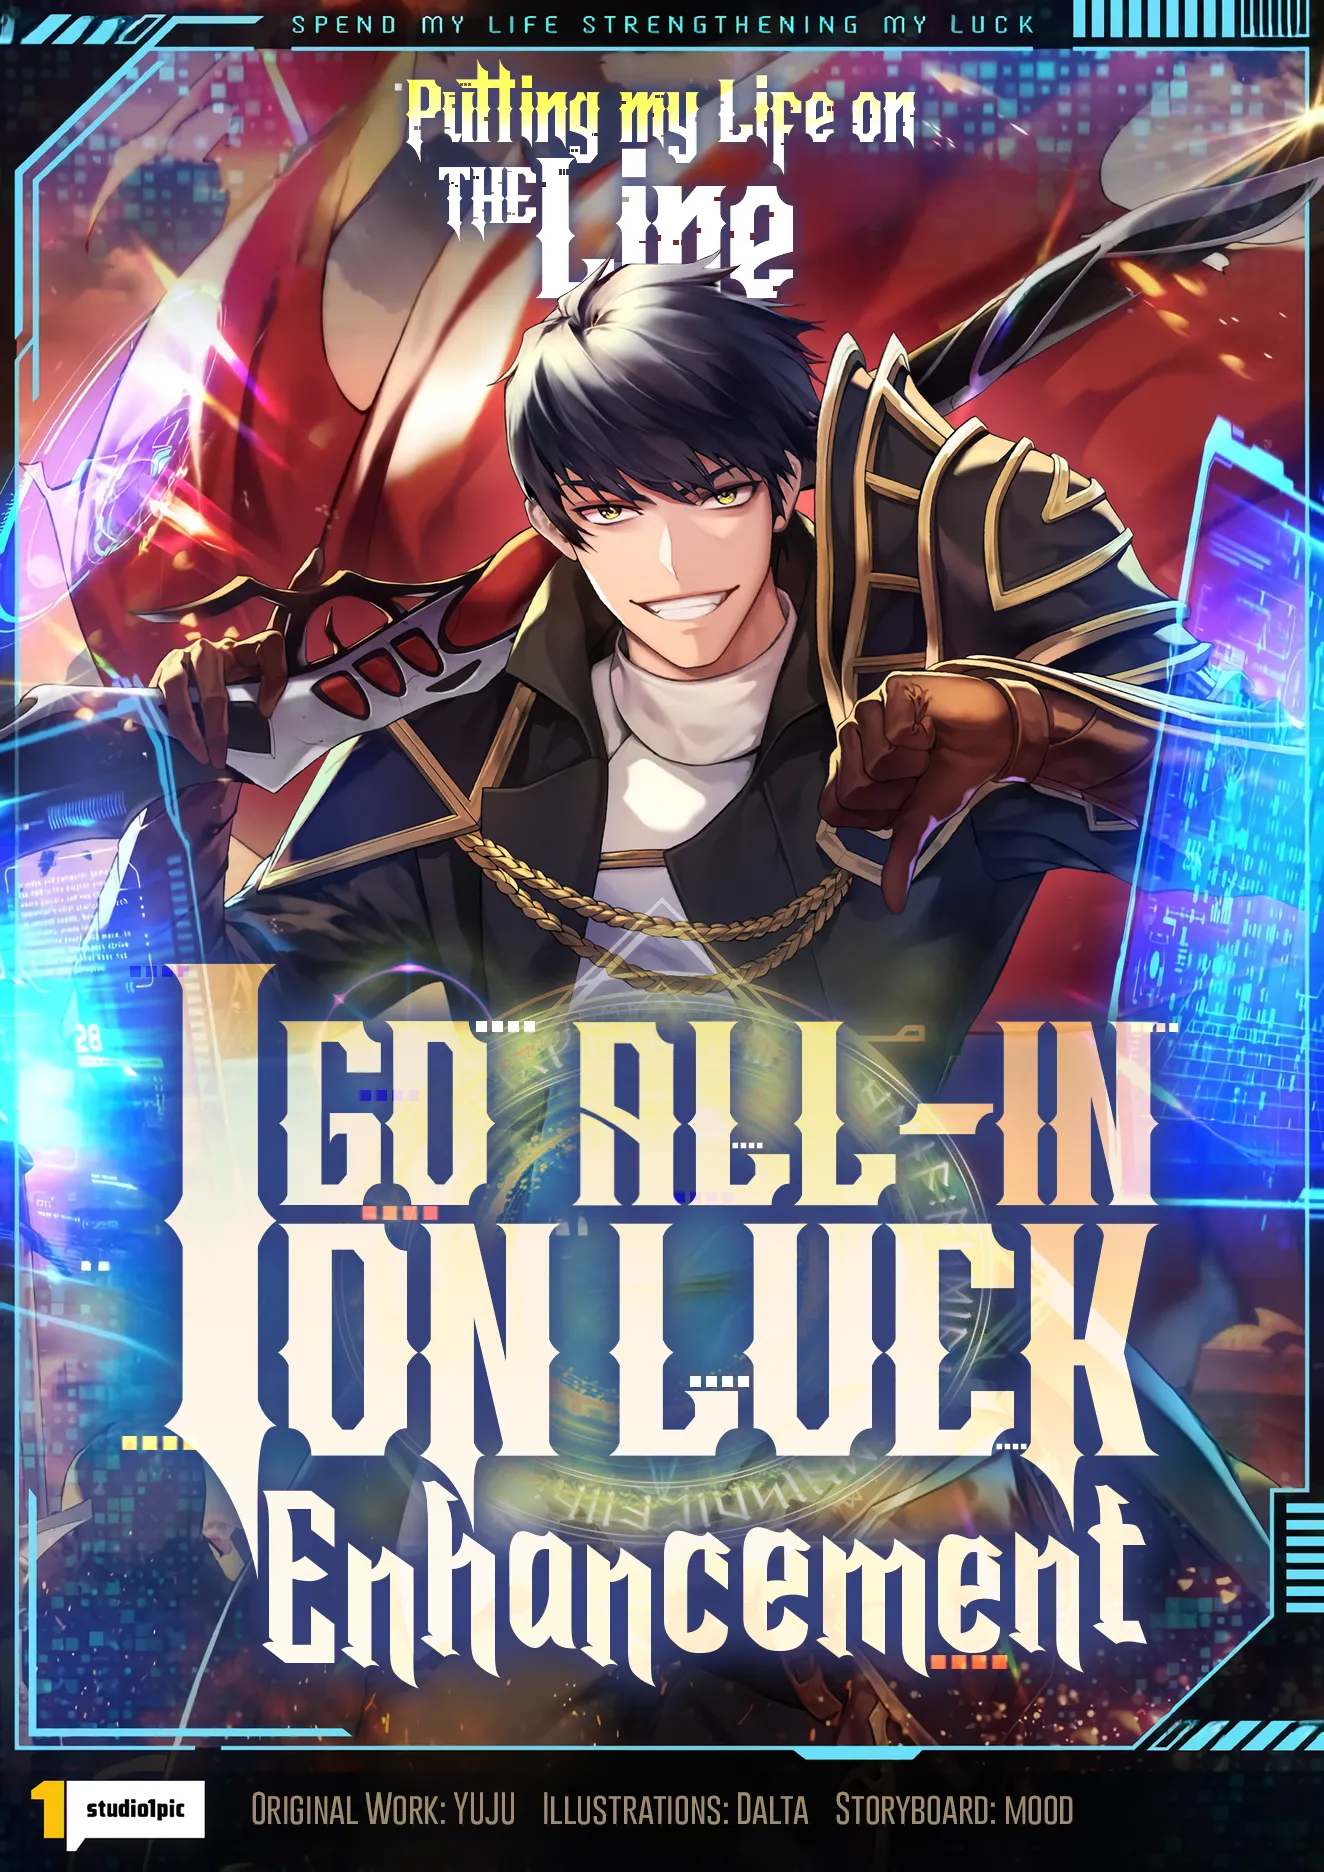 PUTTING MY LIFE ON THE LINE, I GO ALL-IN ON LUCK ENHANCEMENT THUMBNAIL